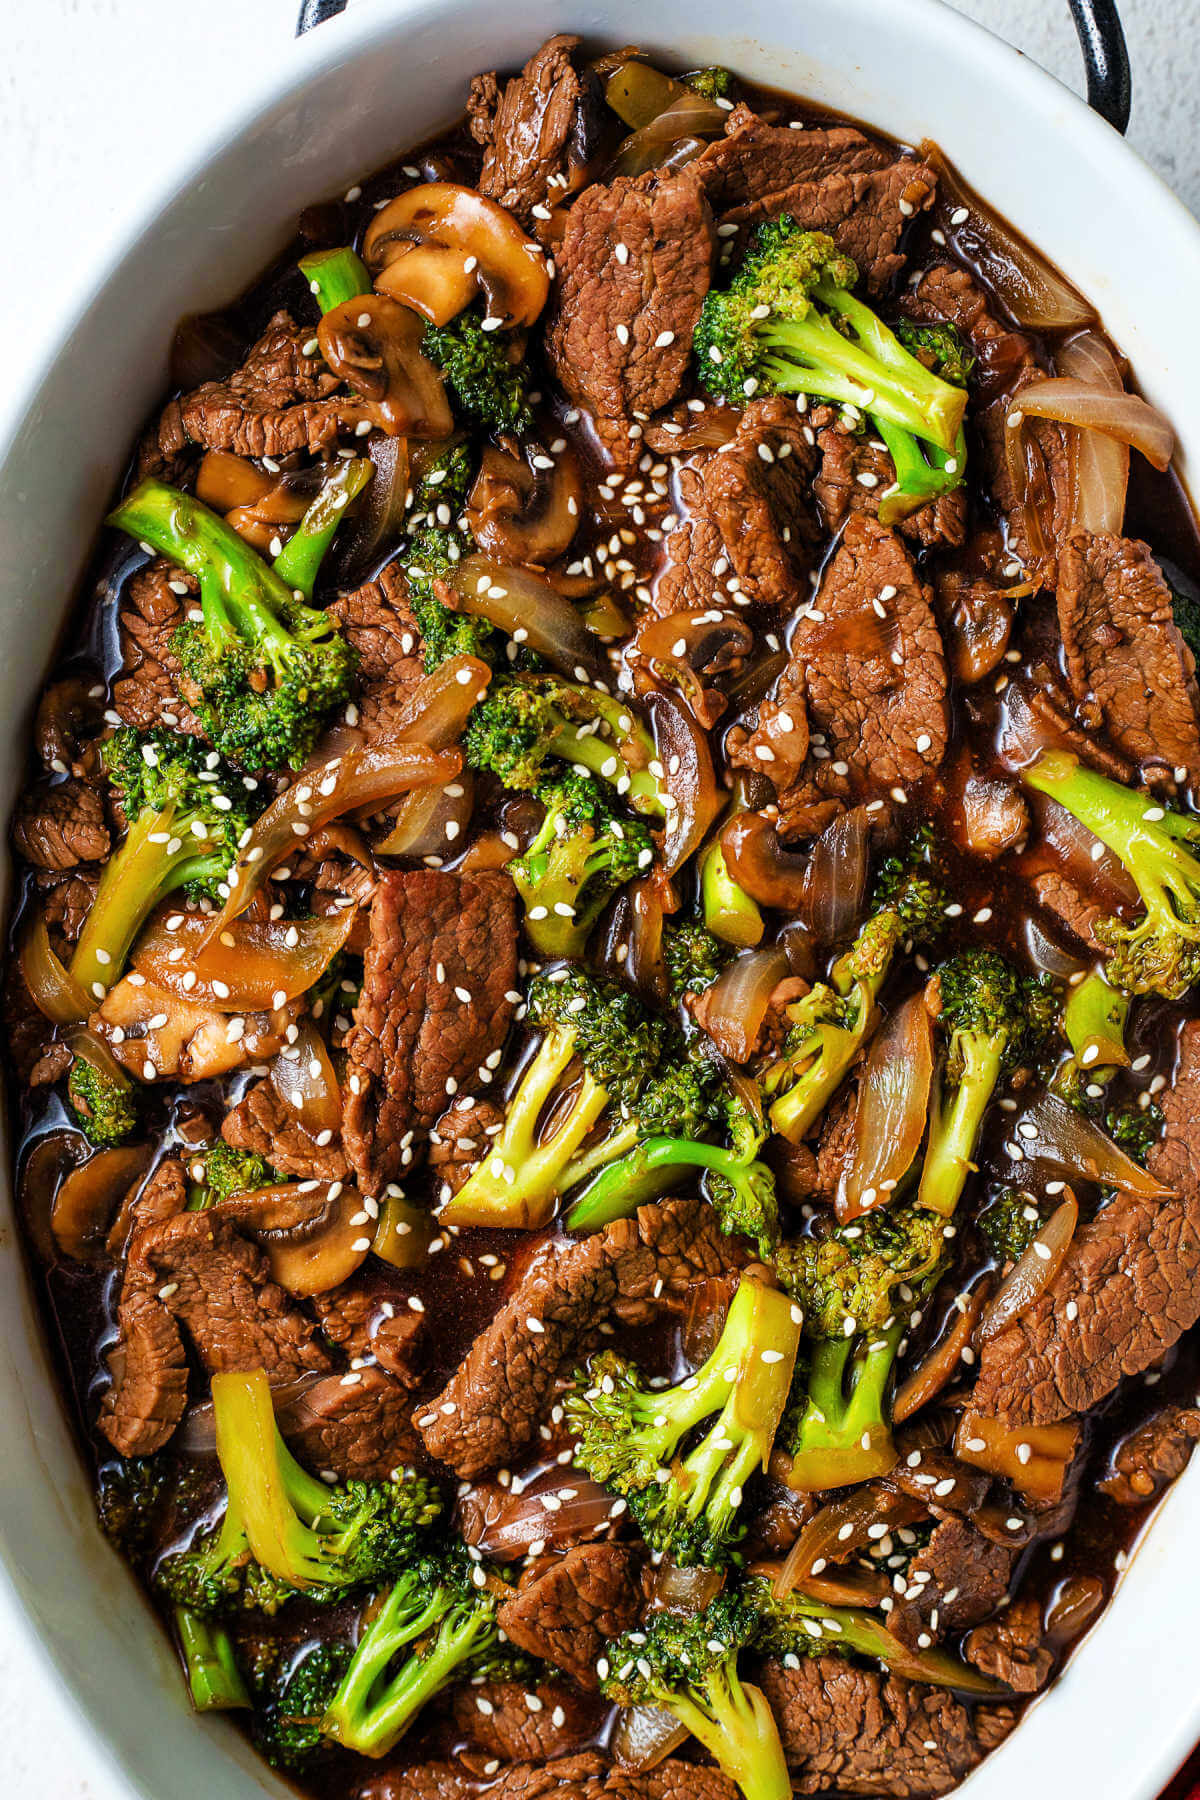 beef and broccoli in a platter garnished with sesame seeds on a table.